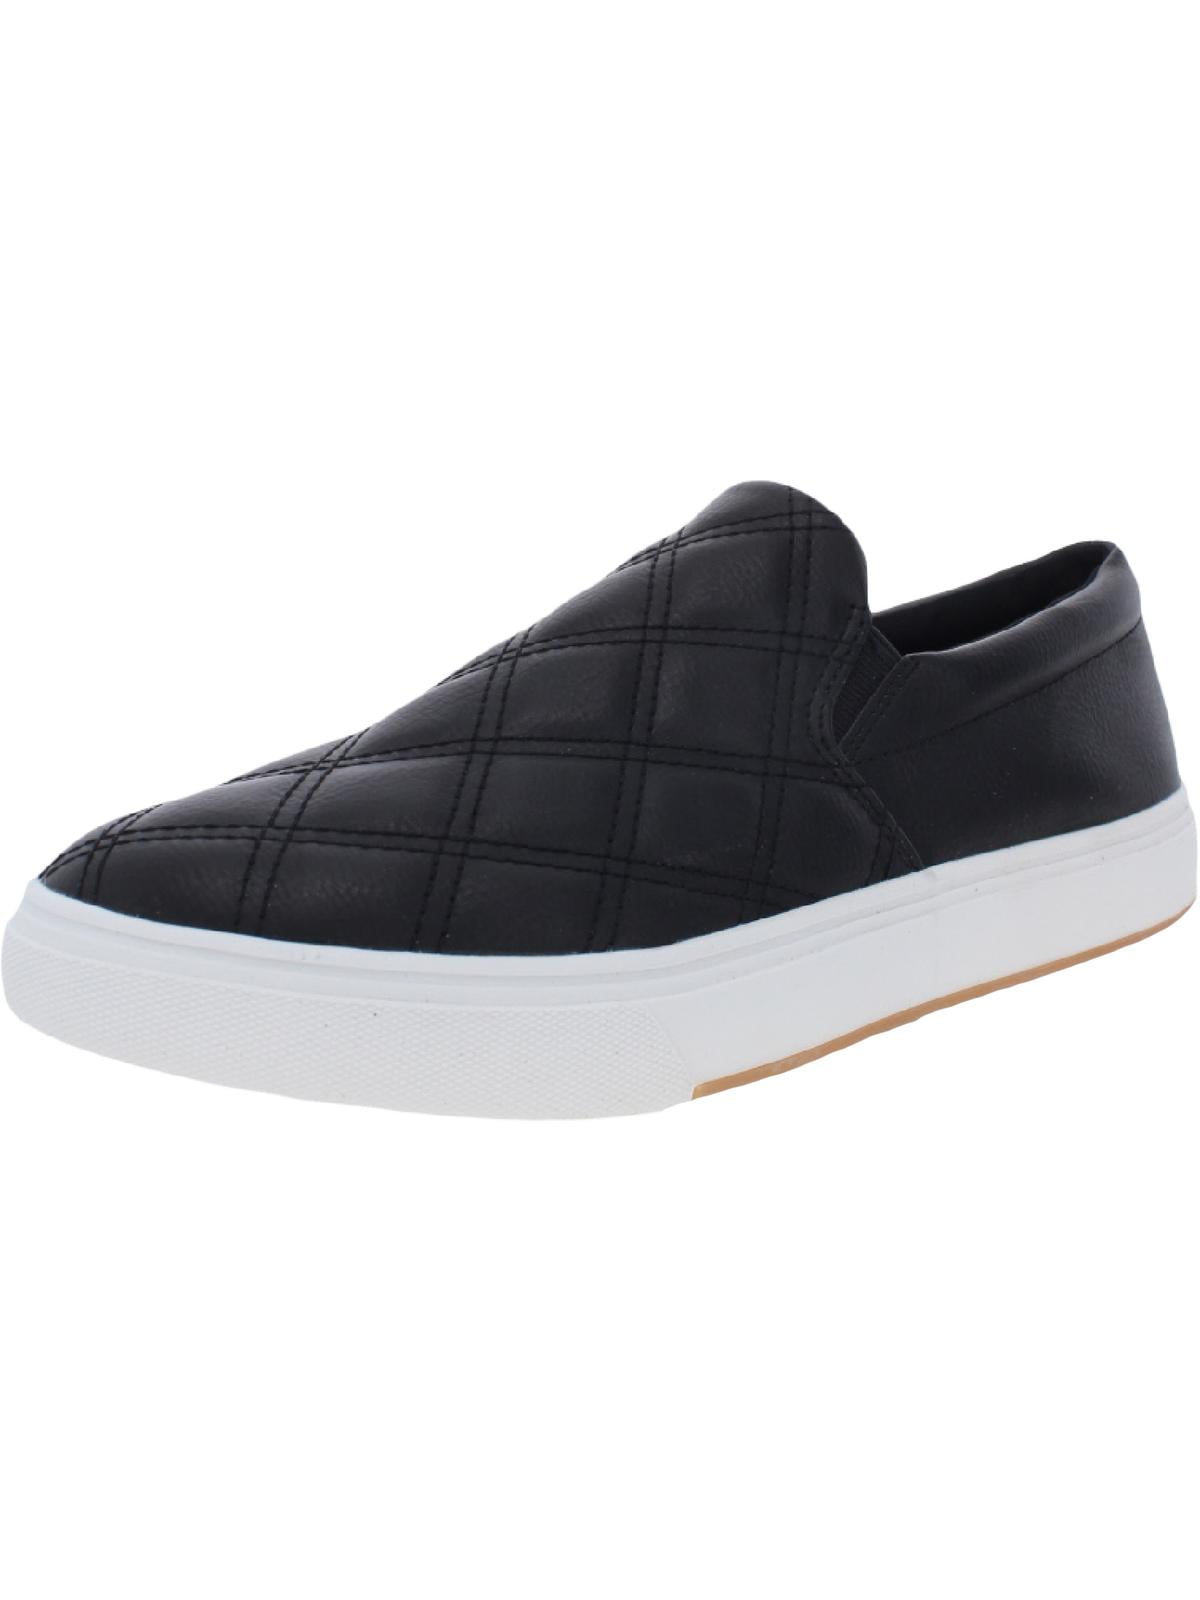 TRAVELER MENS SNEAKERS BY STEVE MADDEN | Mens sneakers casual, Sporty shoes,  Lacing sneakers